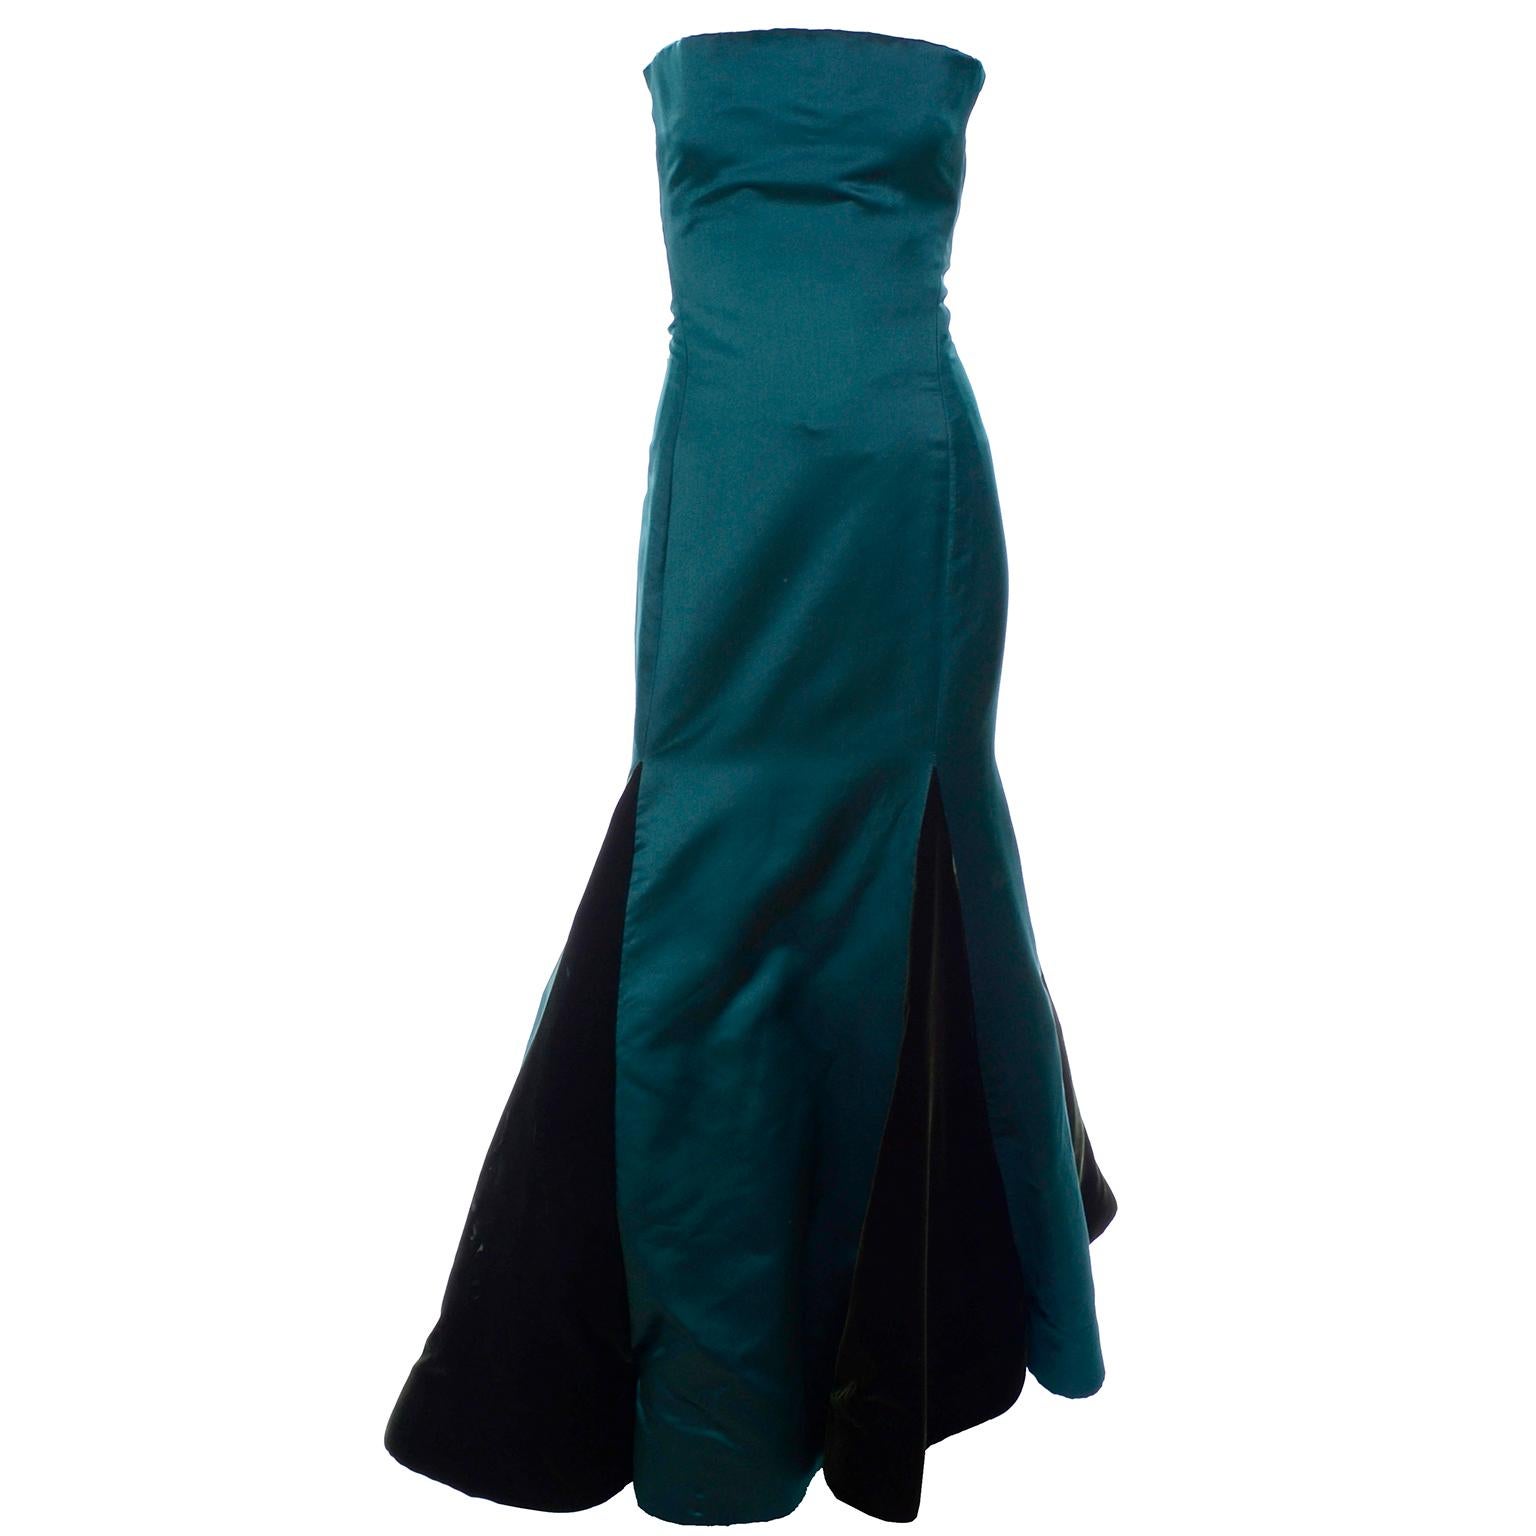 This incredible vintage green dress was designed by the incomparable Arnold Scaasi.  This stunning evening gown is strapless with a gorgeous uniquely cut bodice and a trumpet skirt that has alternating rows of velvet and satin. The dress is fully